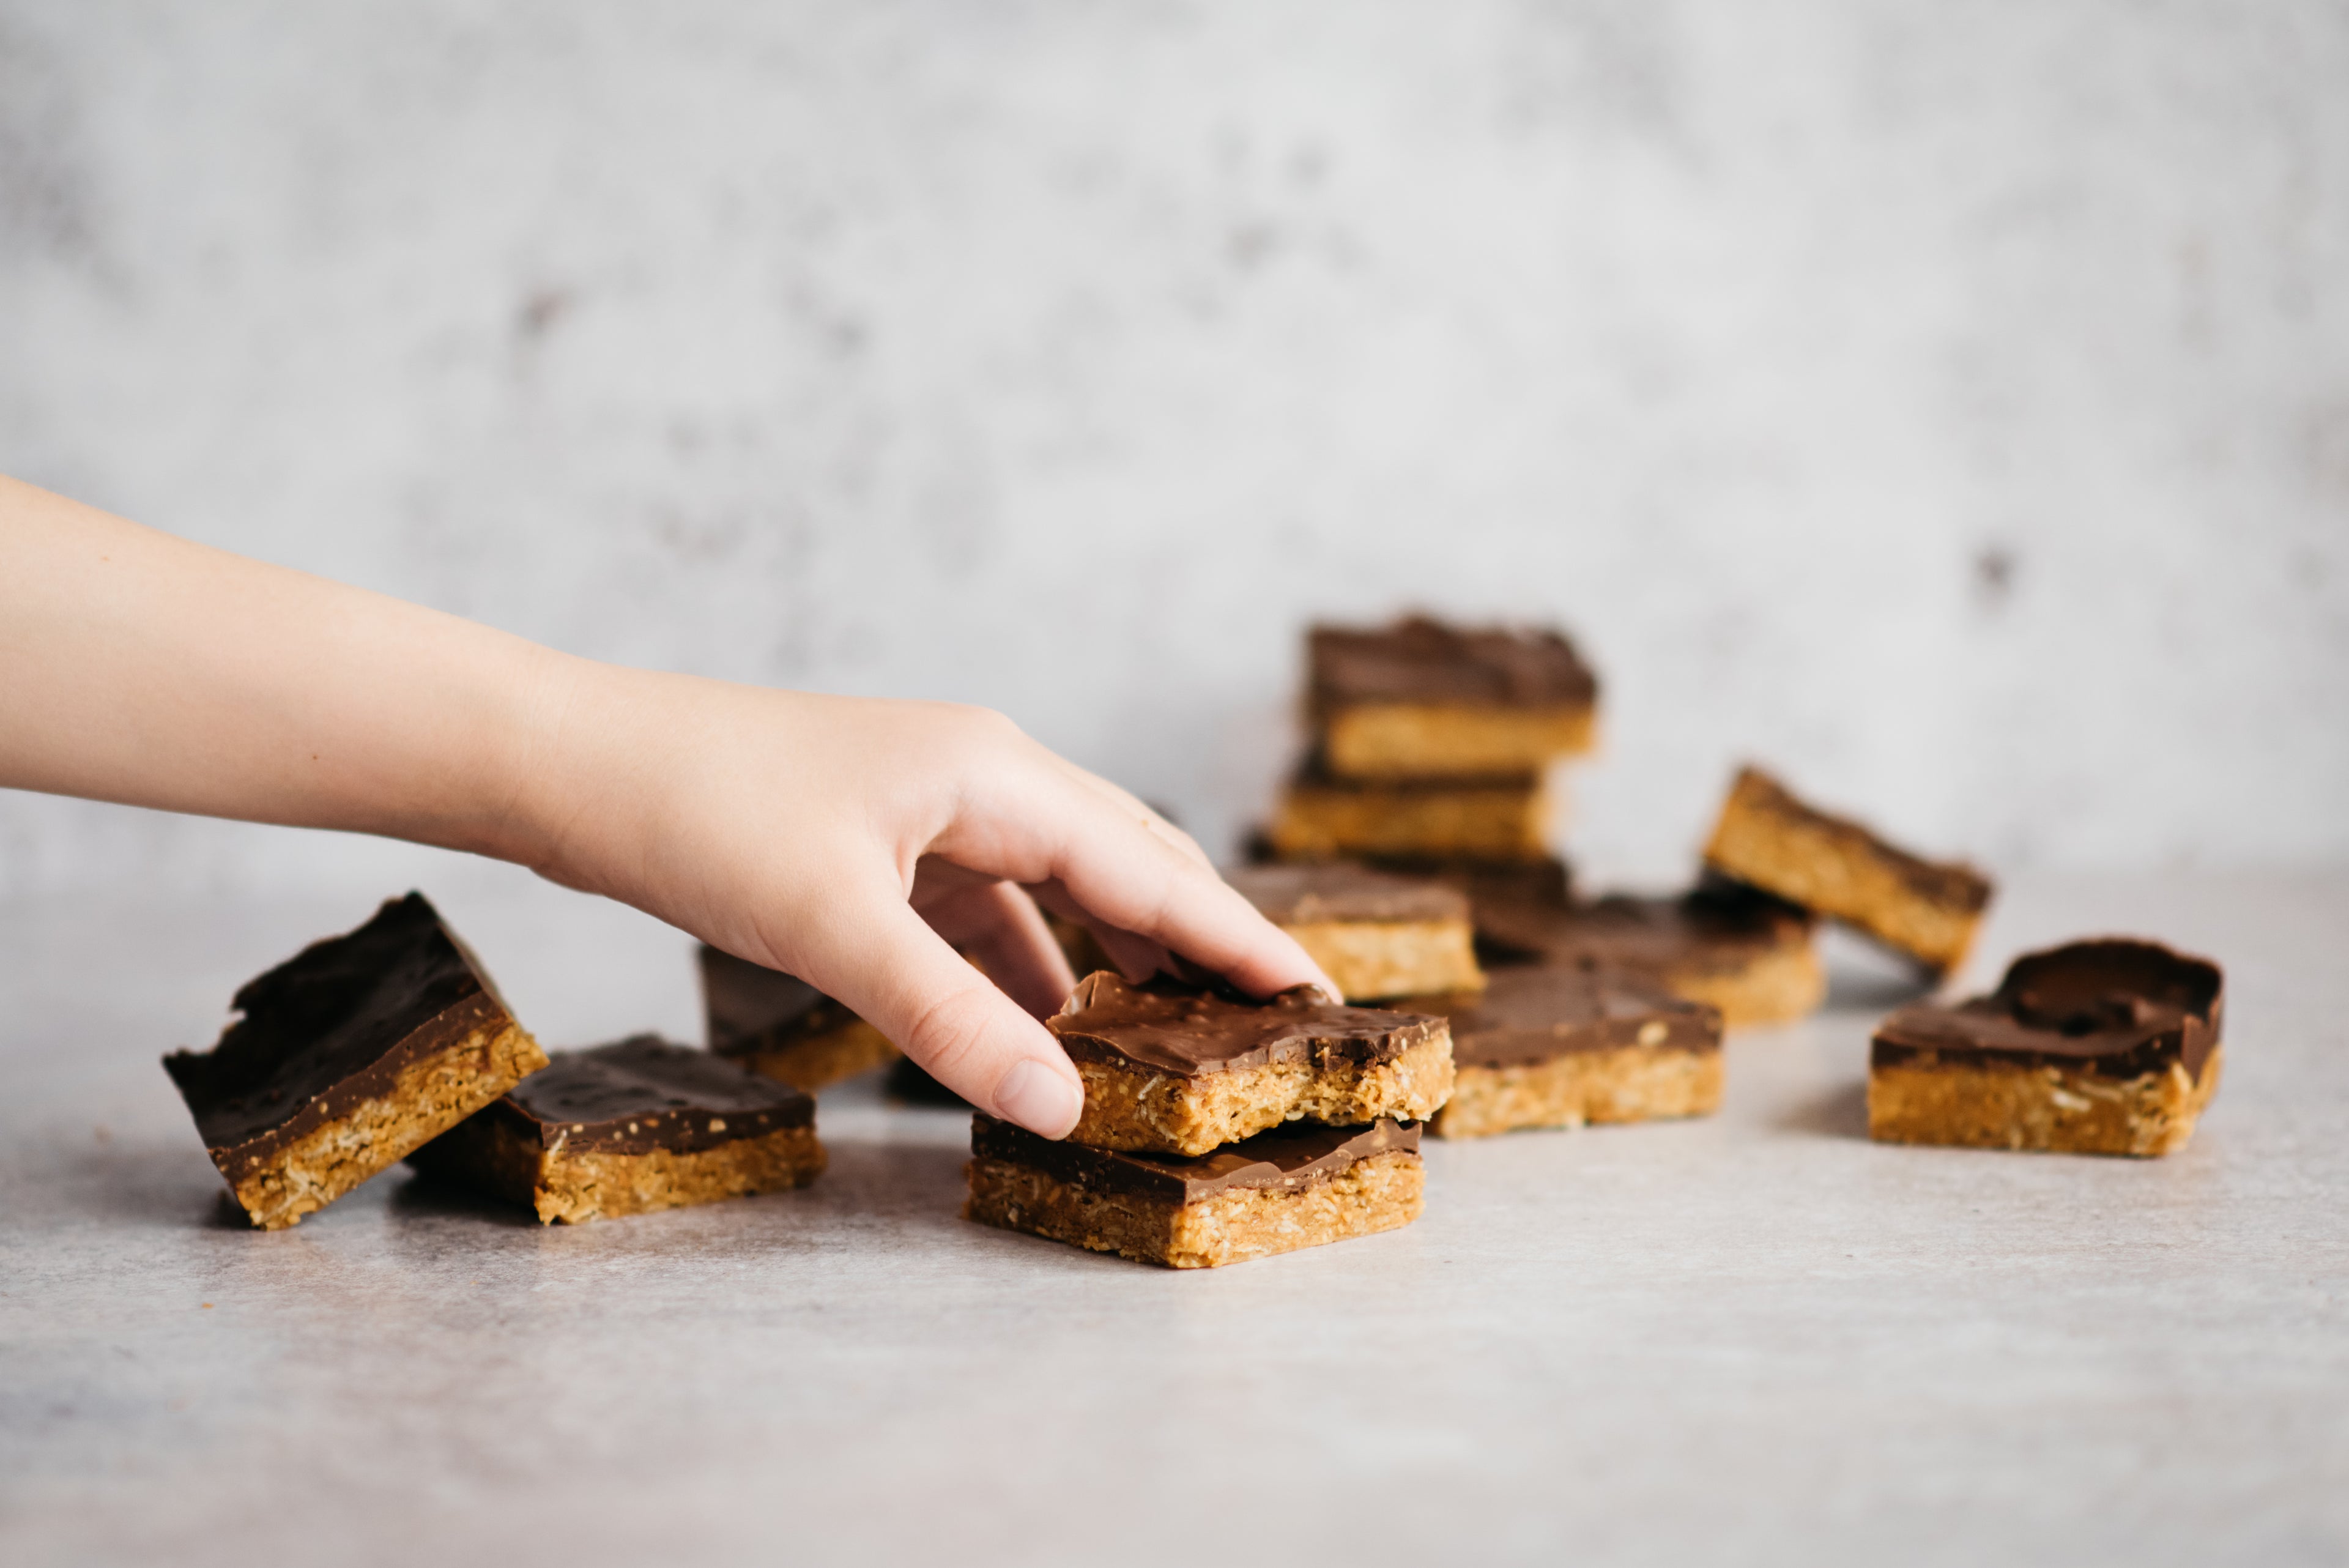 Hand reaching for a Chocolate Peanut Butter Square, with a batch cut up and stacked